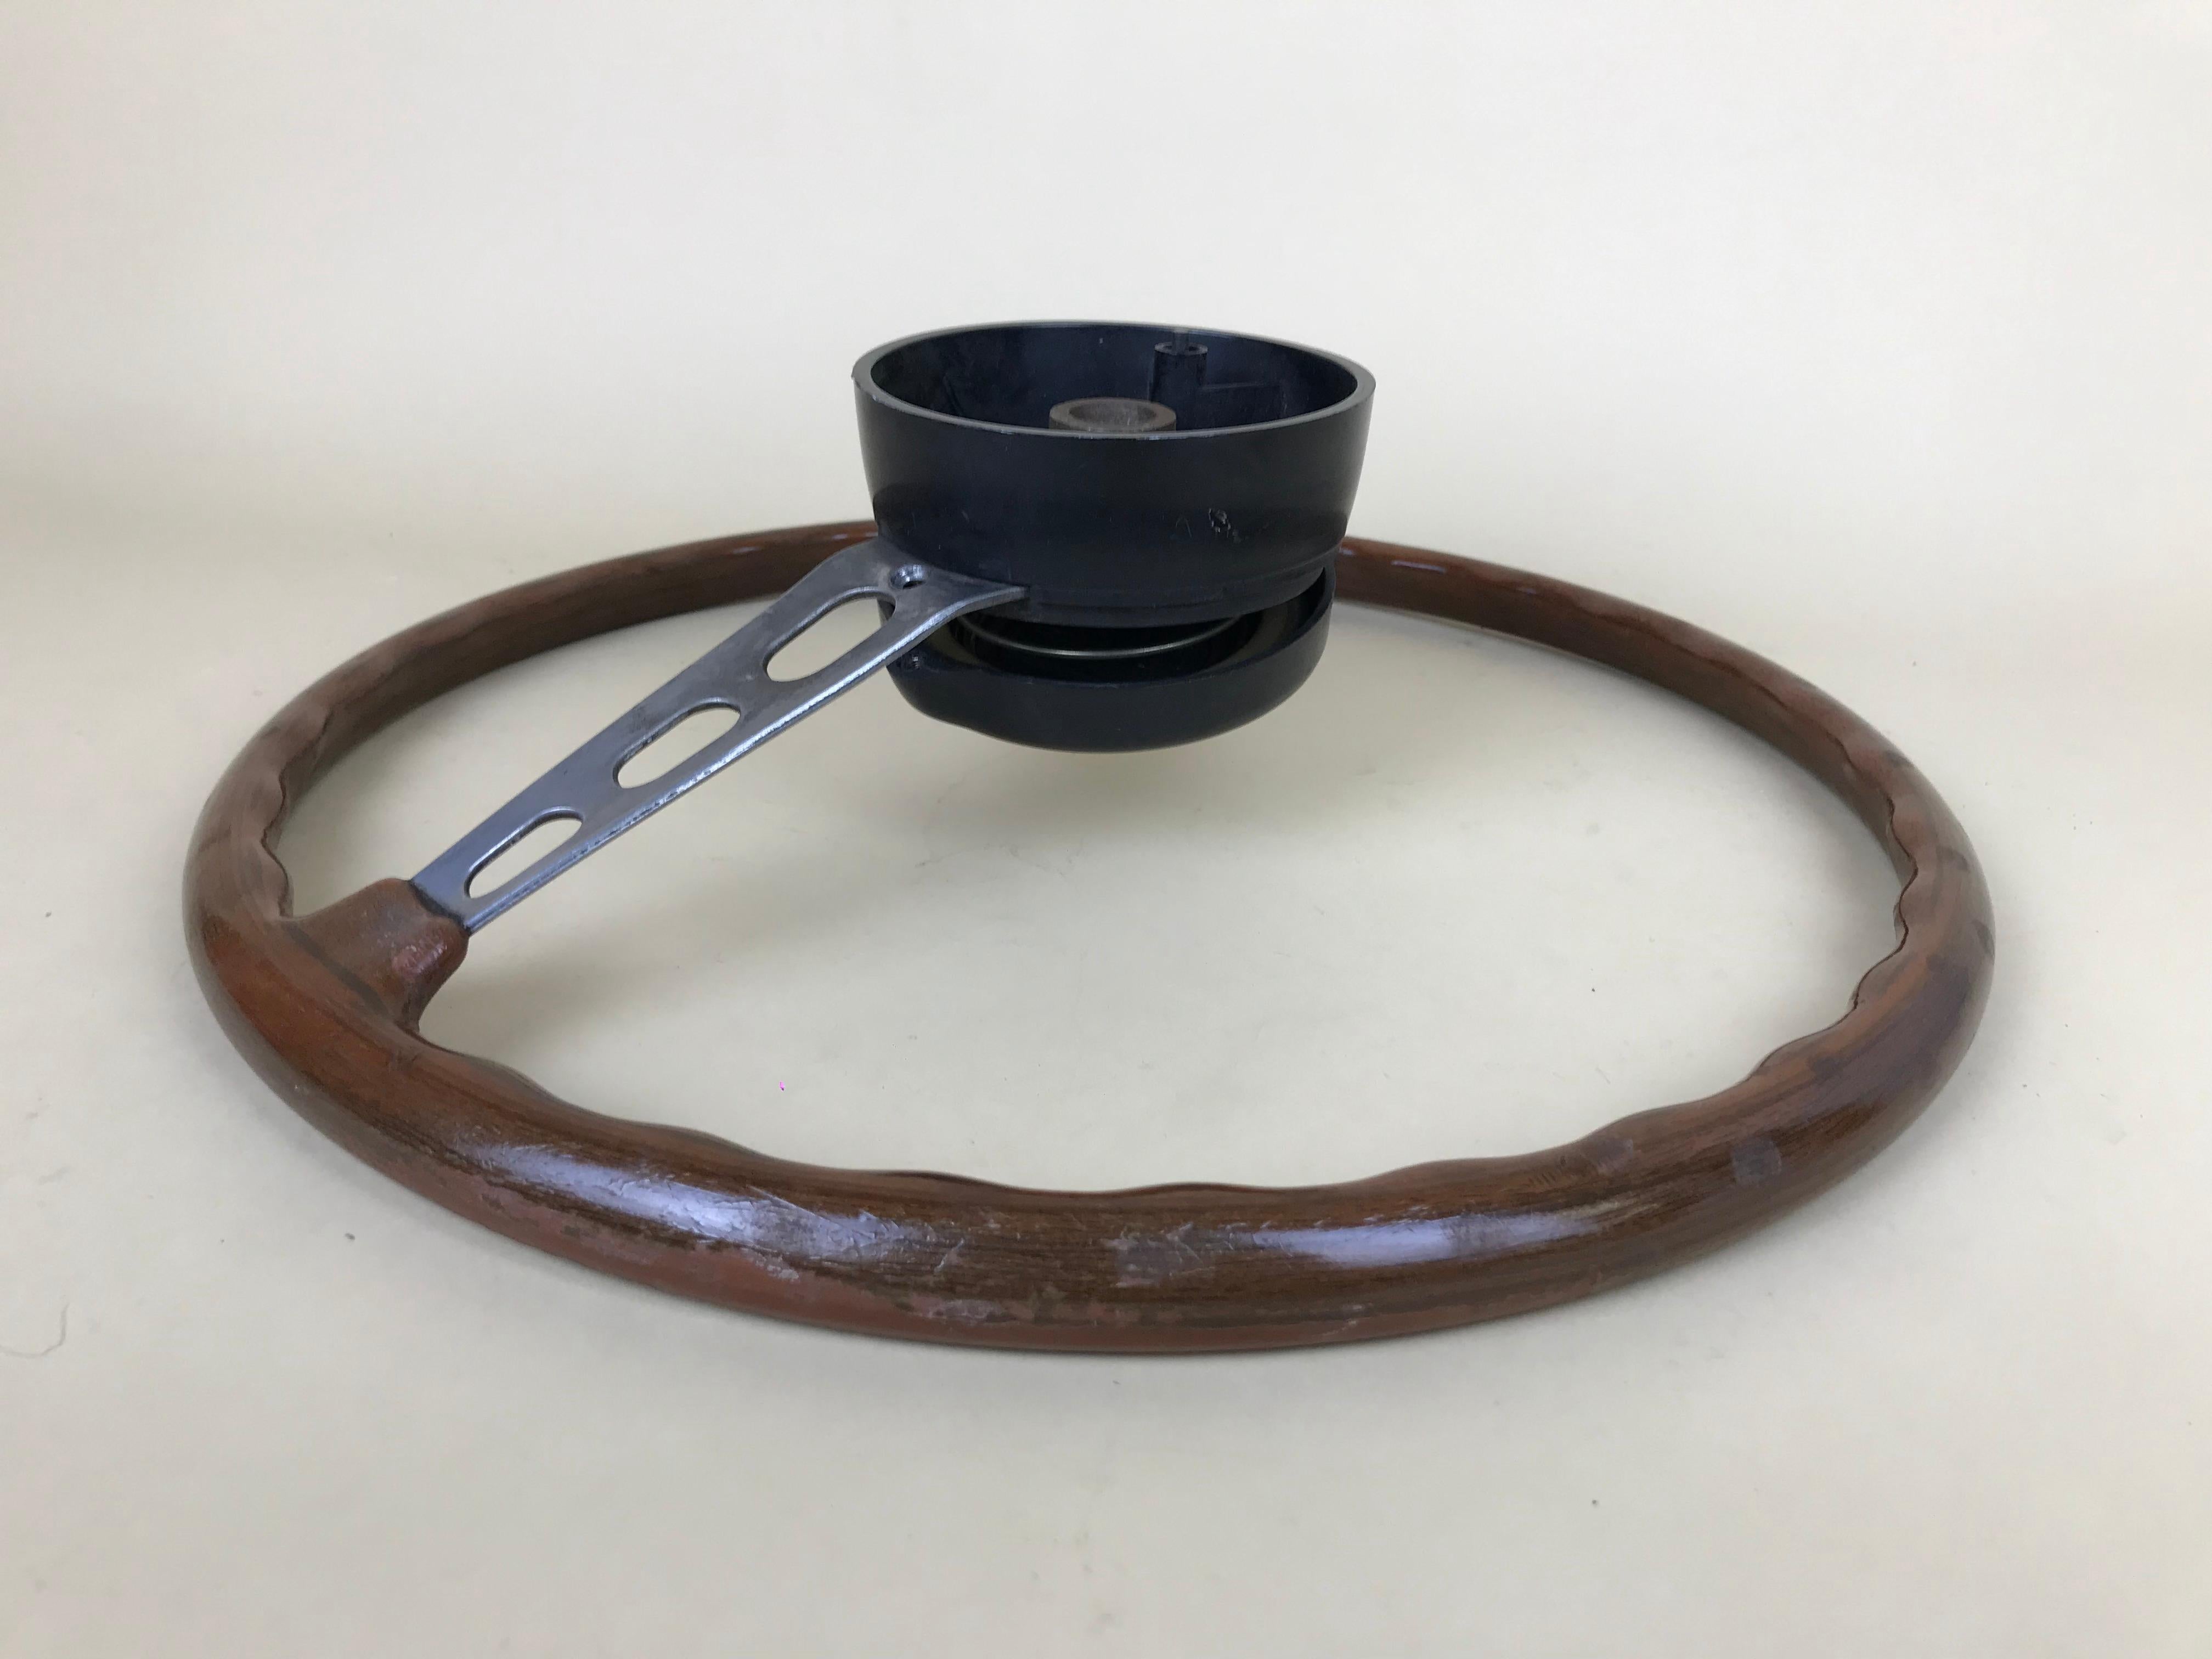 1960s Vintage Wooden and Metal Lancia Steering Wheel Made in Italy For Sale 10